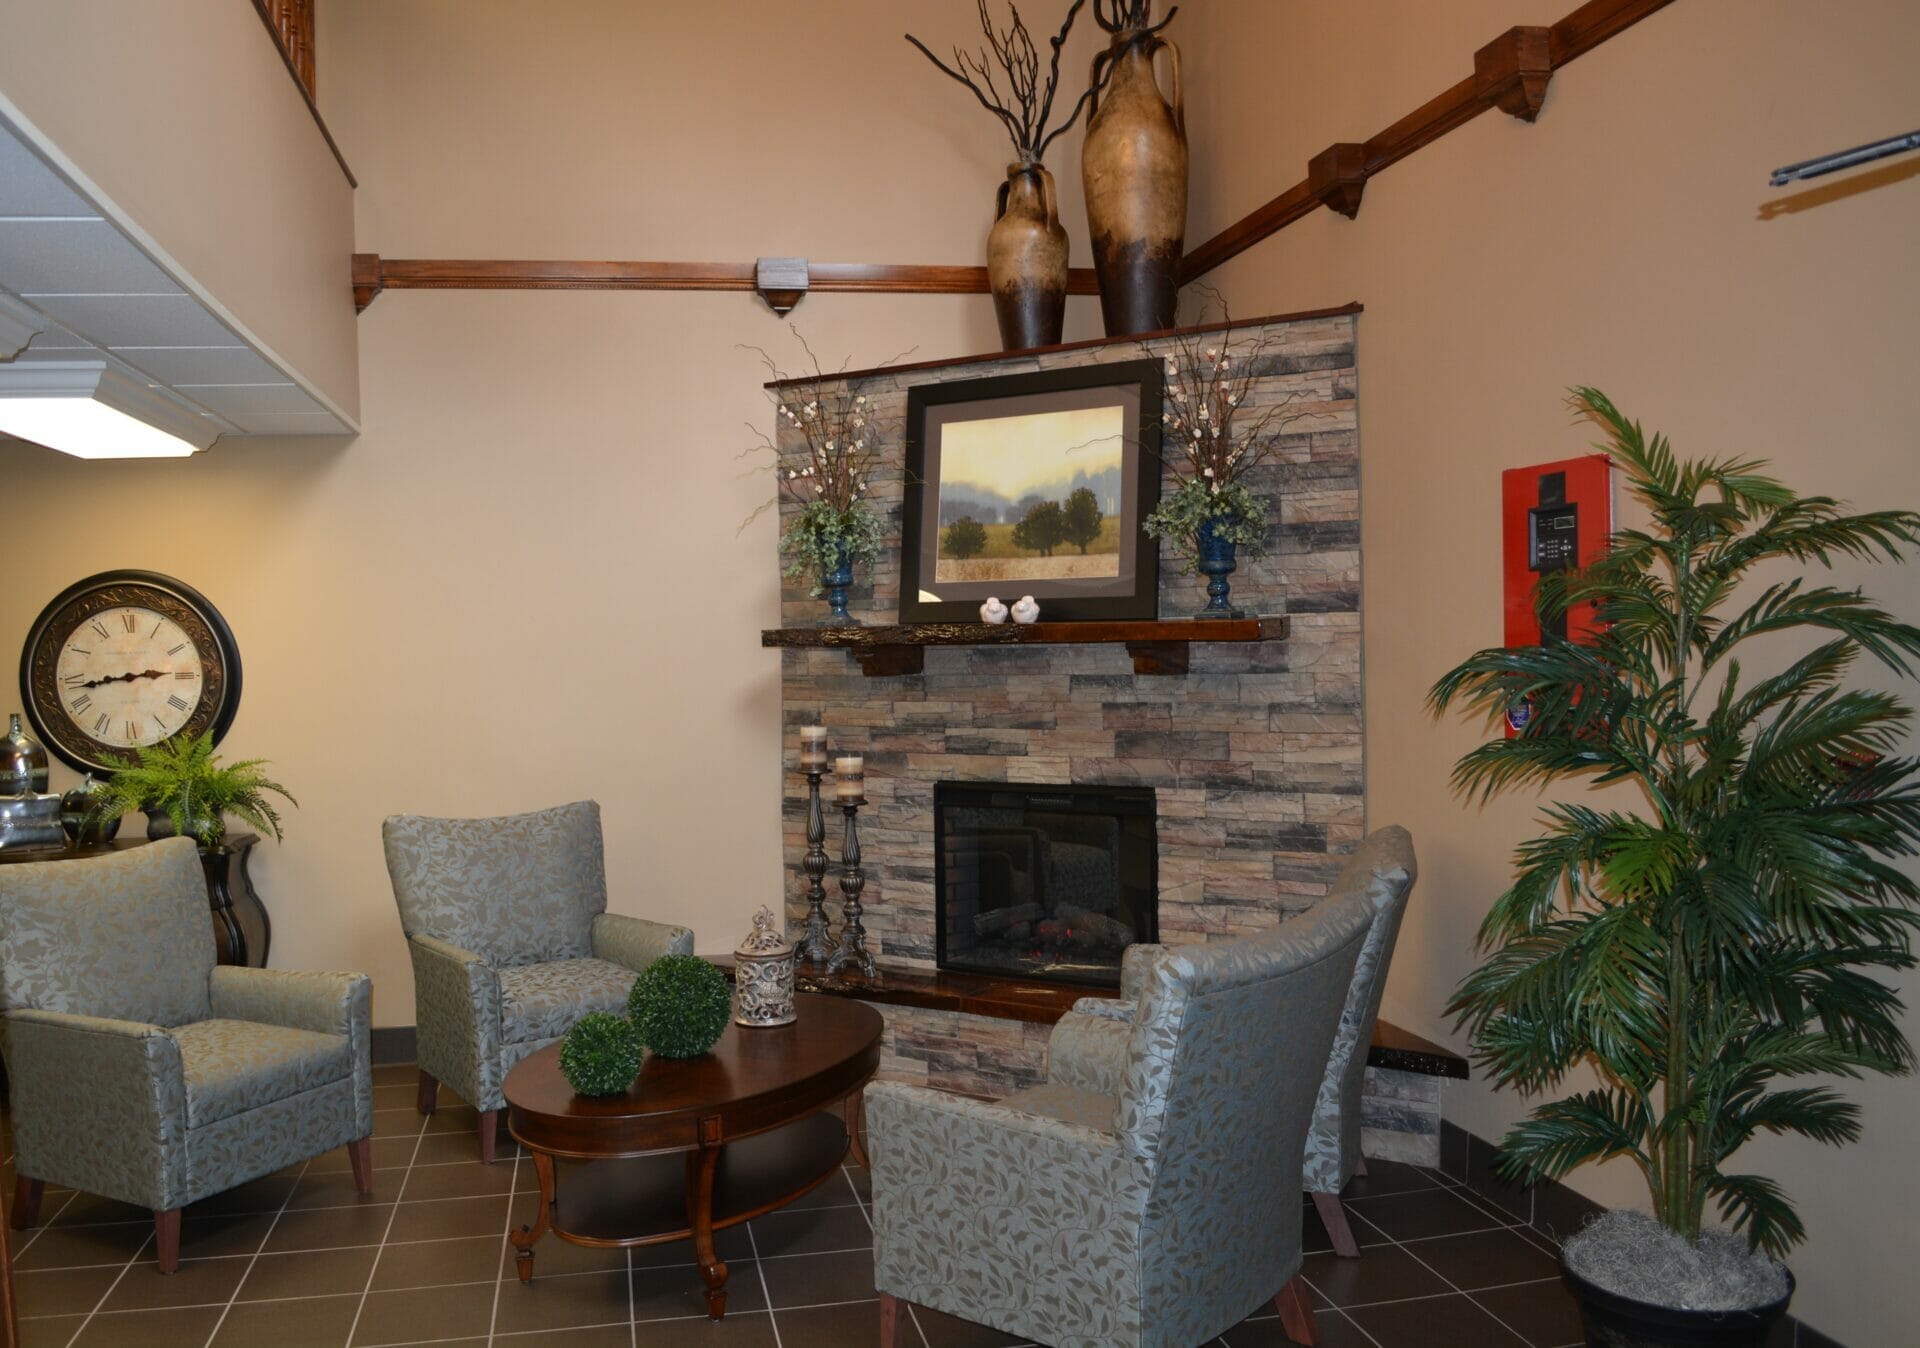 <span  class="uc_style_uc_tiles_grid_image_elementor_uc_items_attribute_title" style="color:#000000;">Sitting area in front of the fireplace at Bethany Village </span>